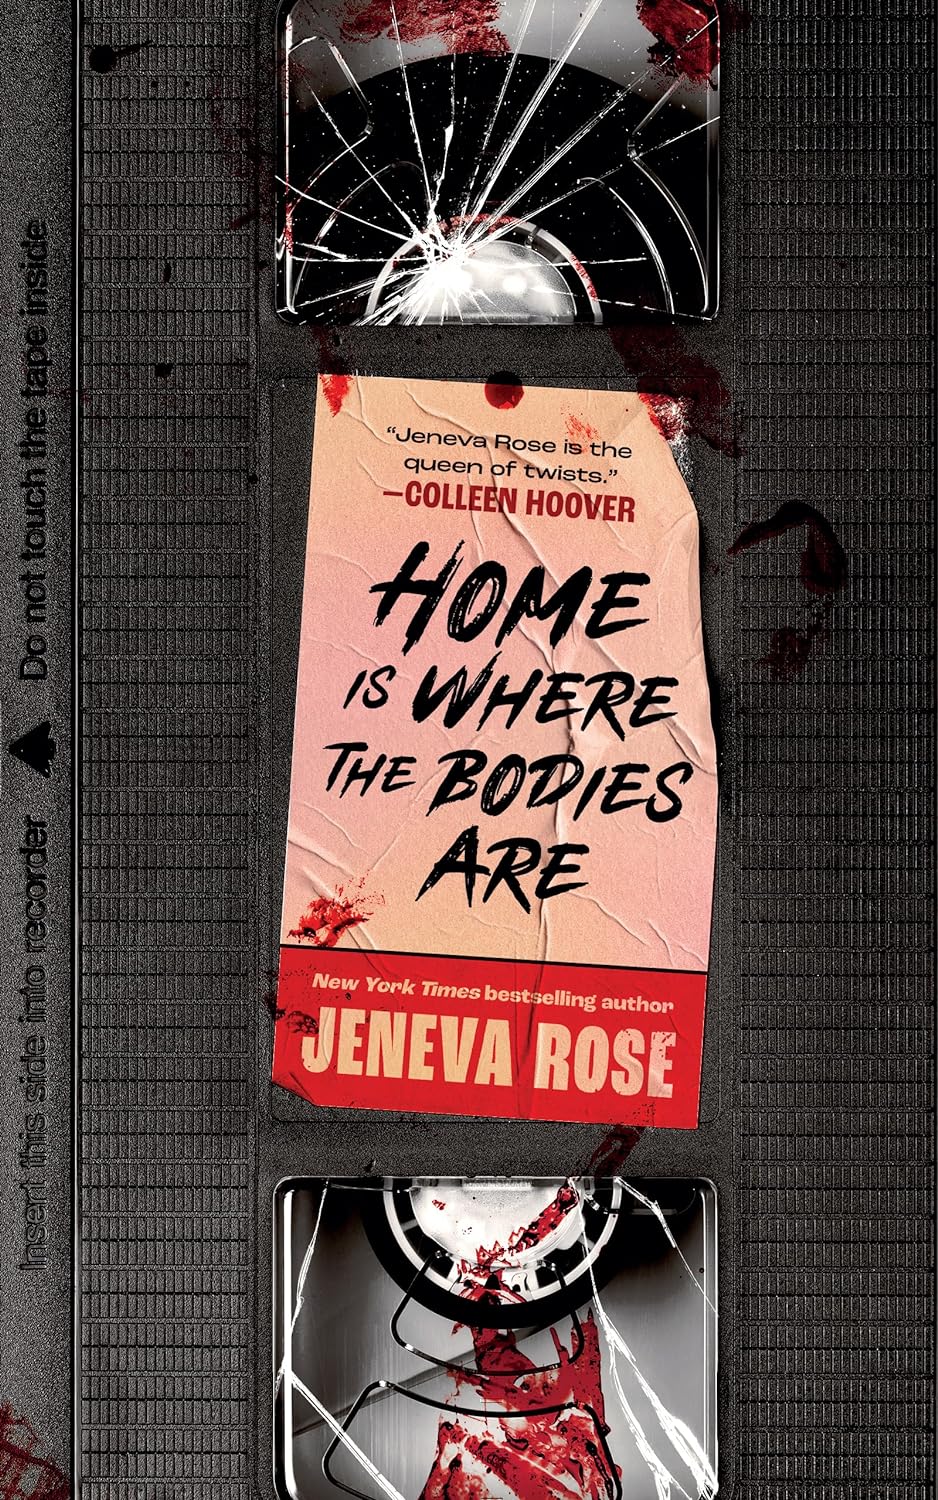 Home is where the bodies are